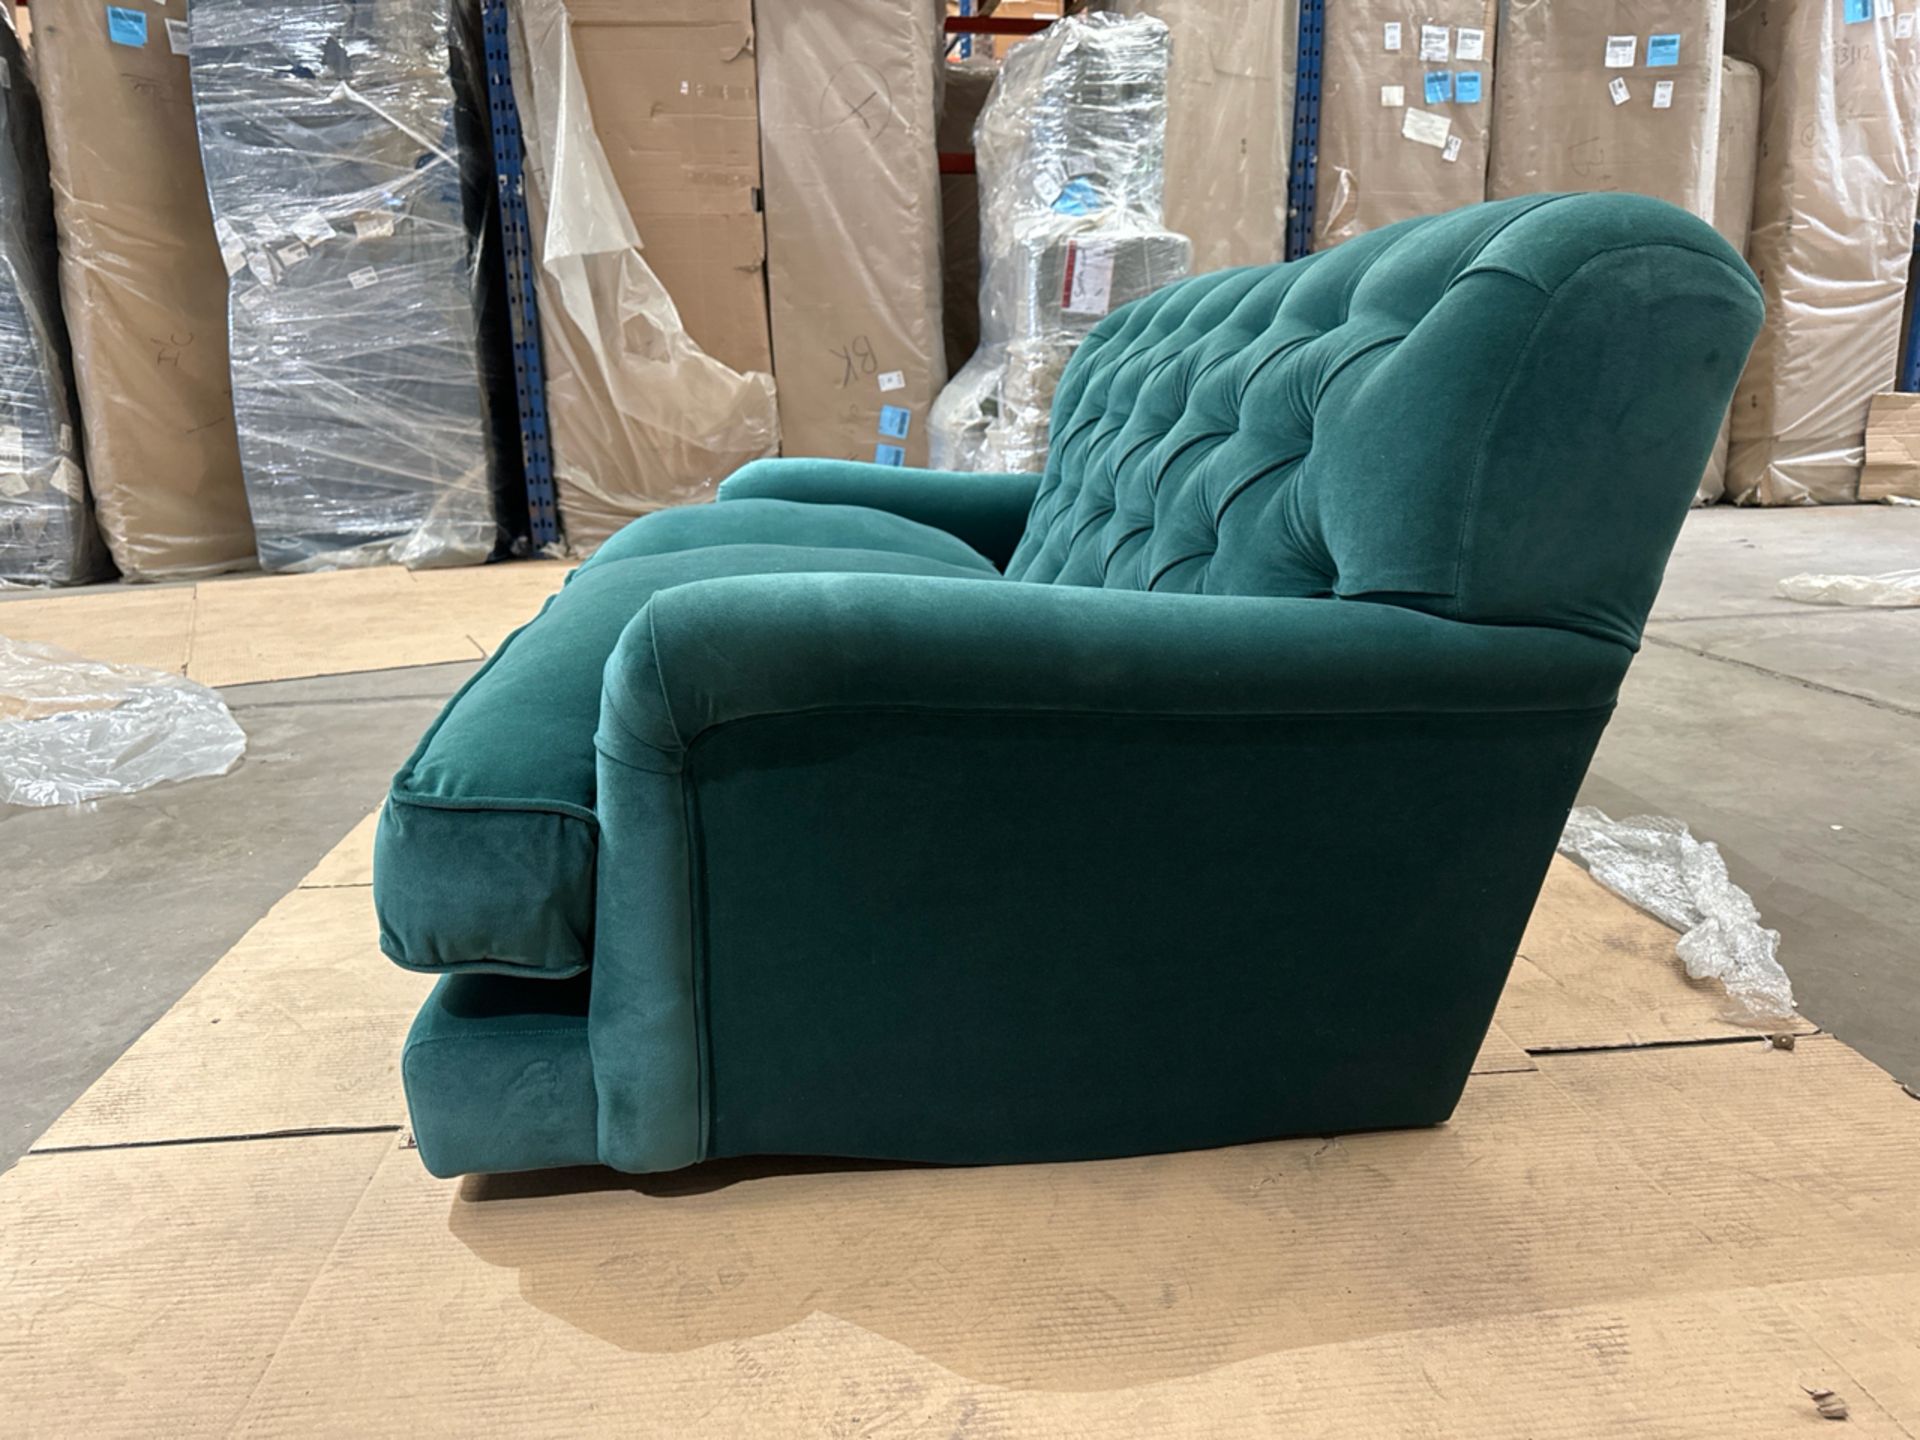 Snowdrop Button Back 2 Seat Sofa In Jade Smart Velvet RRP - £1890 - Image 4 of 6